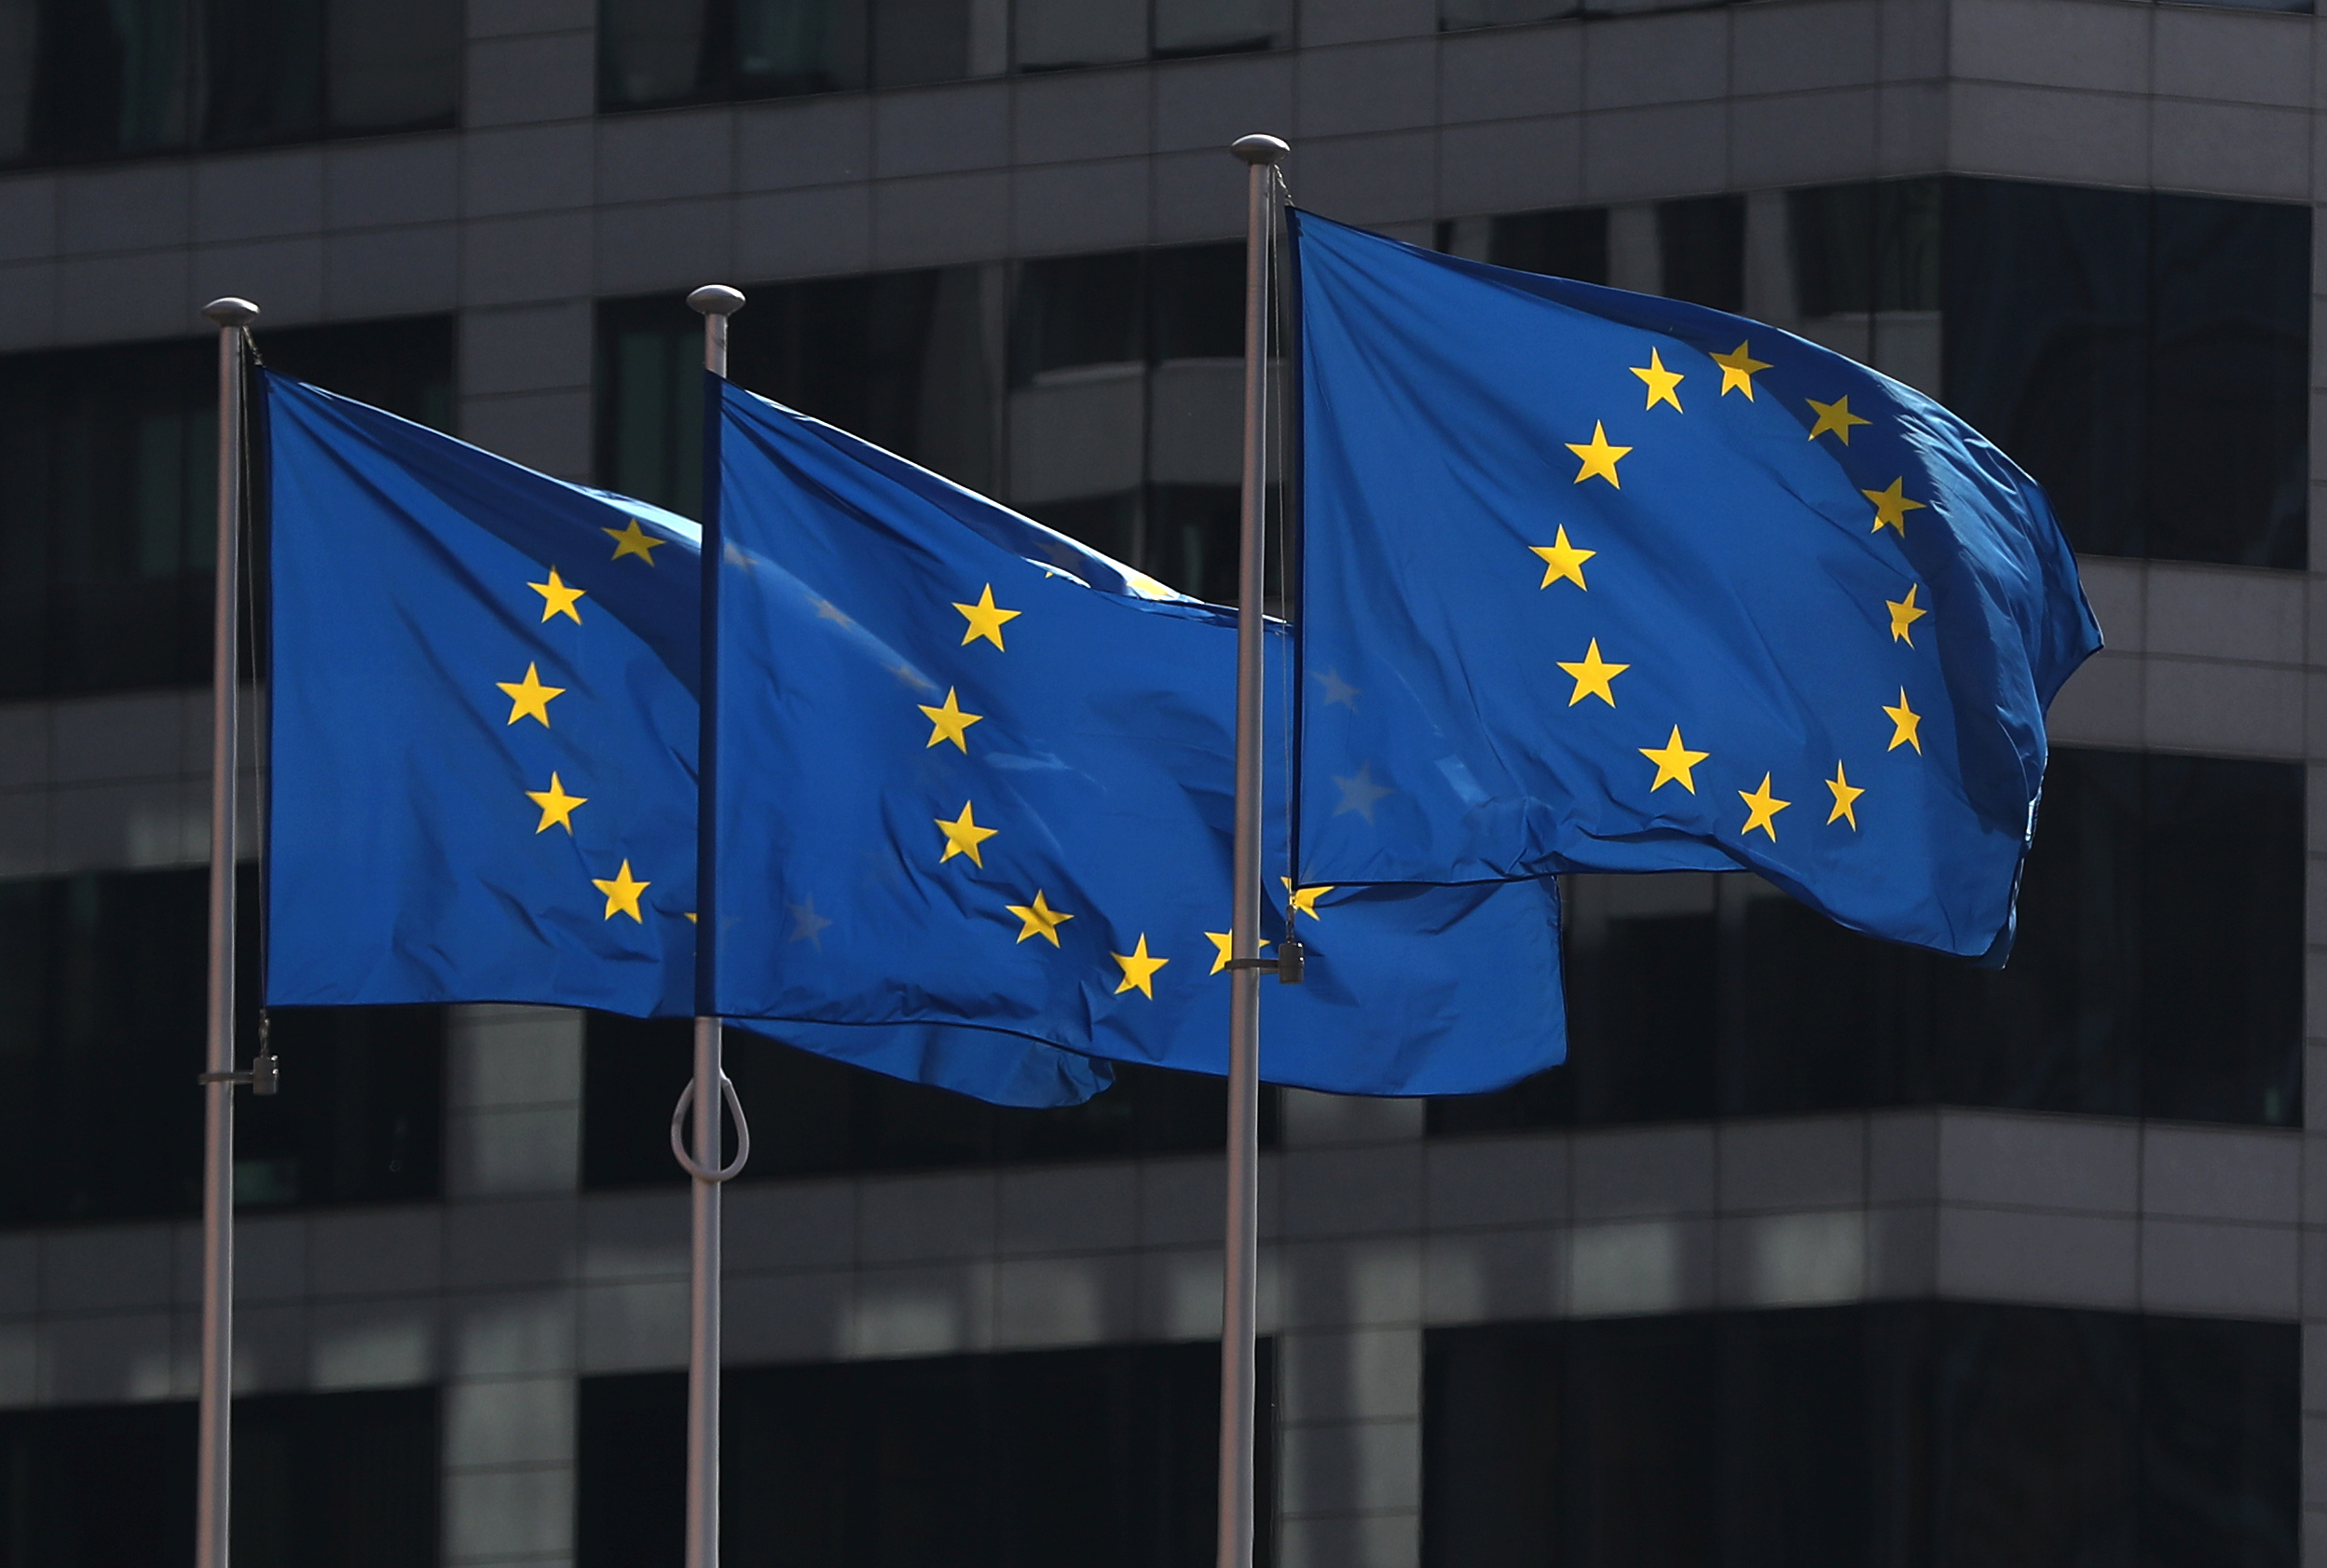 European Union flags fly outside the European Commission headquarters in Brussels, Belgium, April 10, 2019. REUTERS/Yves Herman